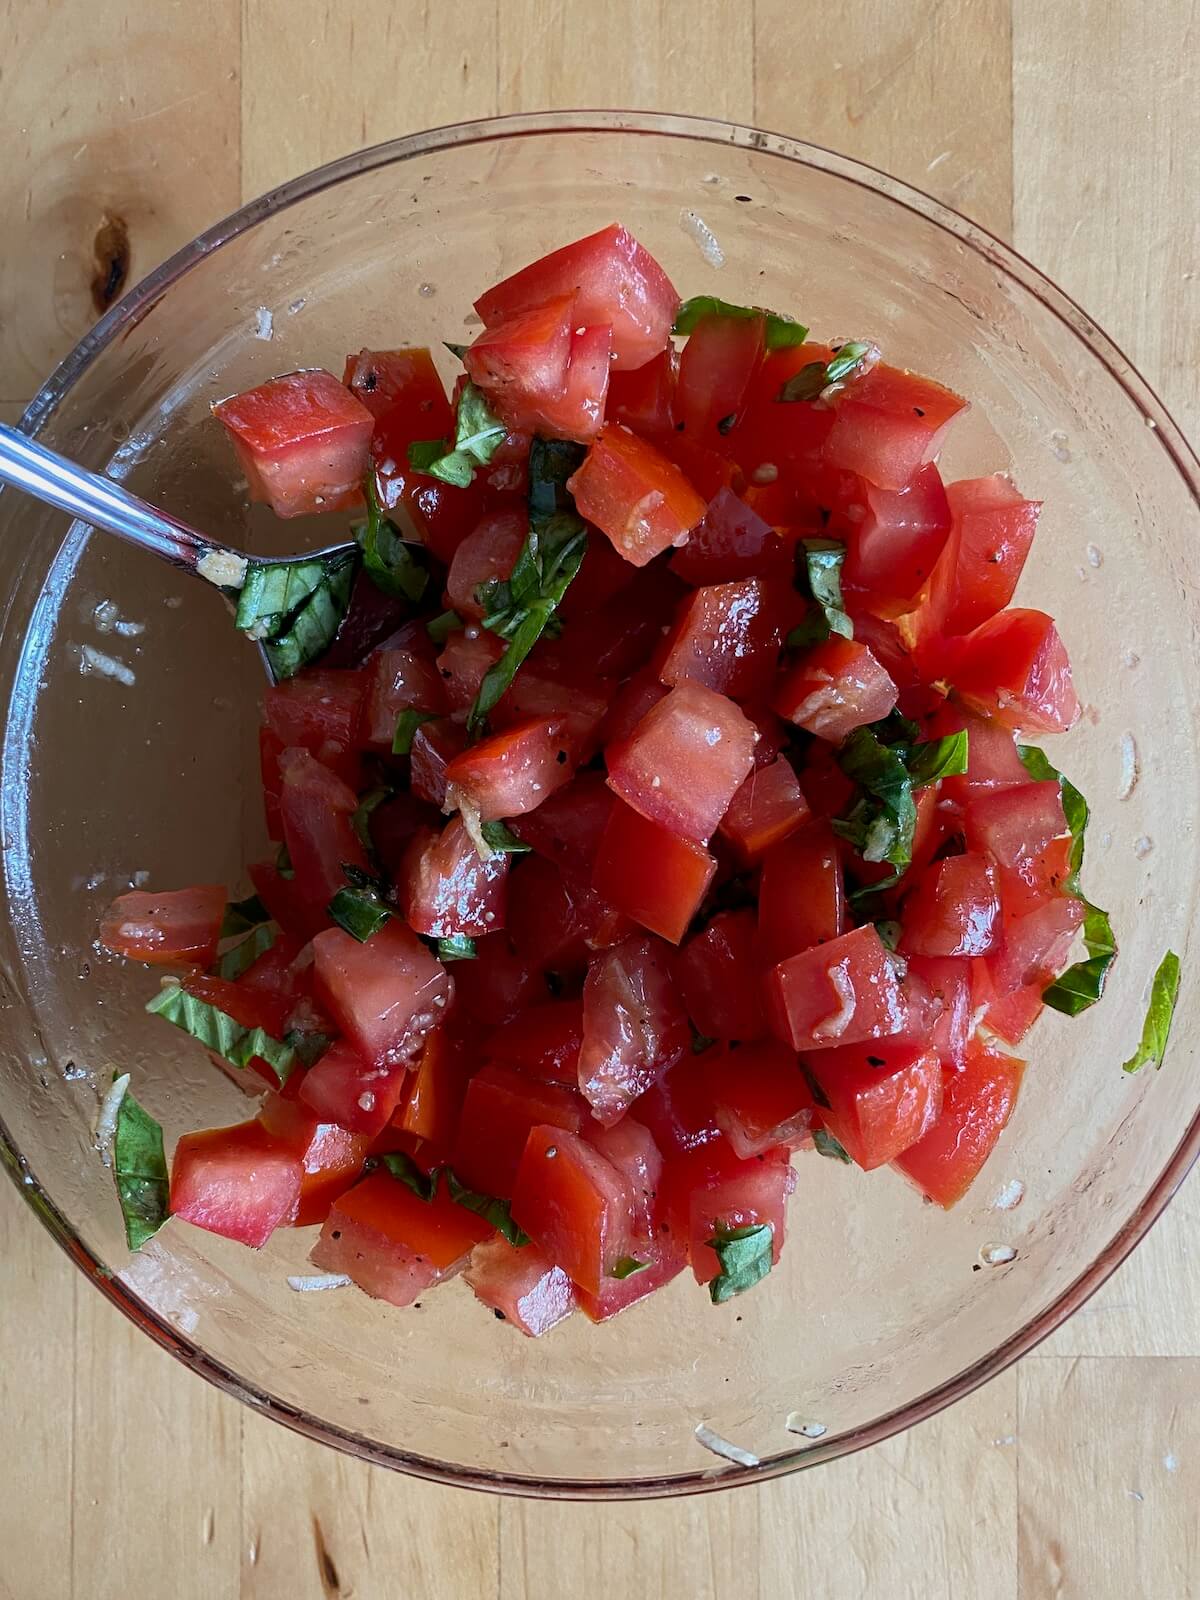 The tomato basil mixture marinated in a glass bowl.